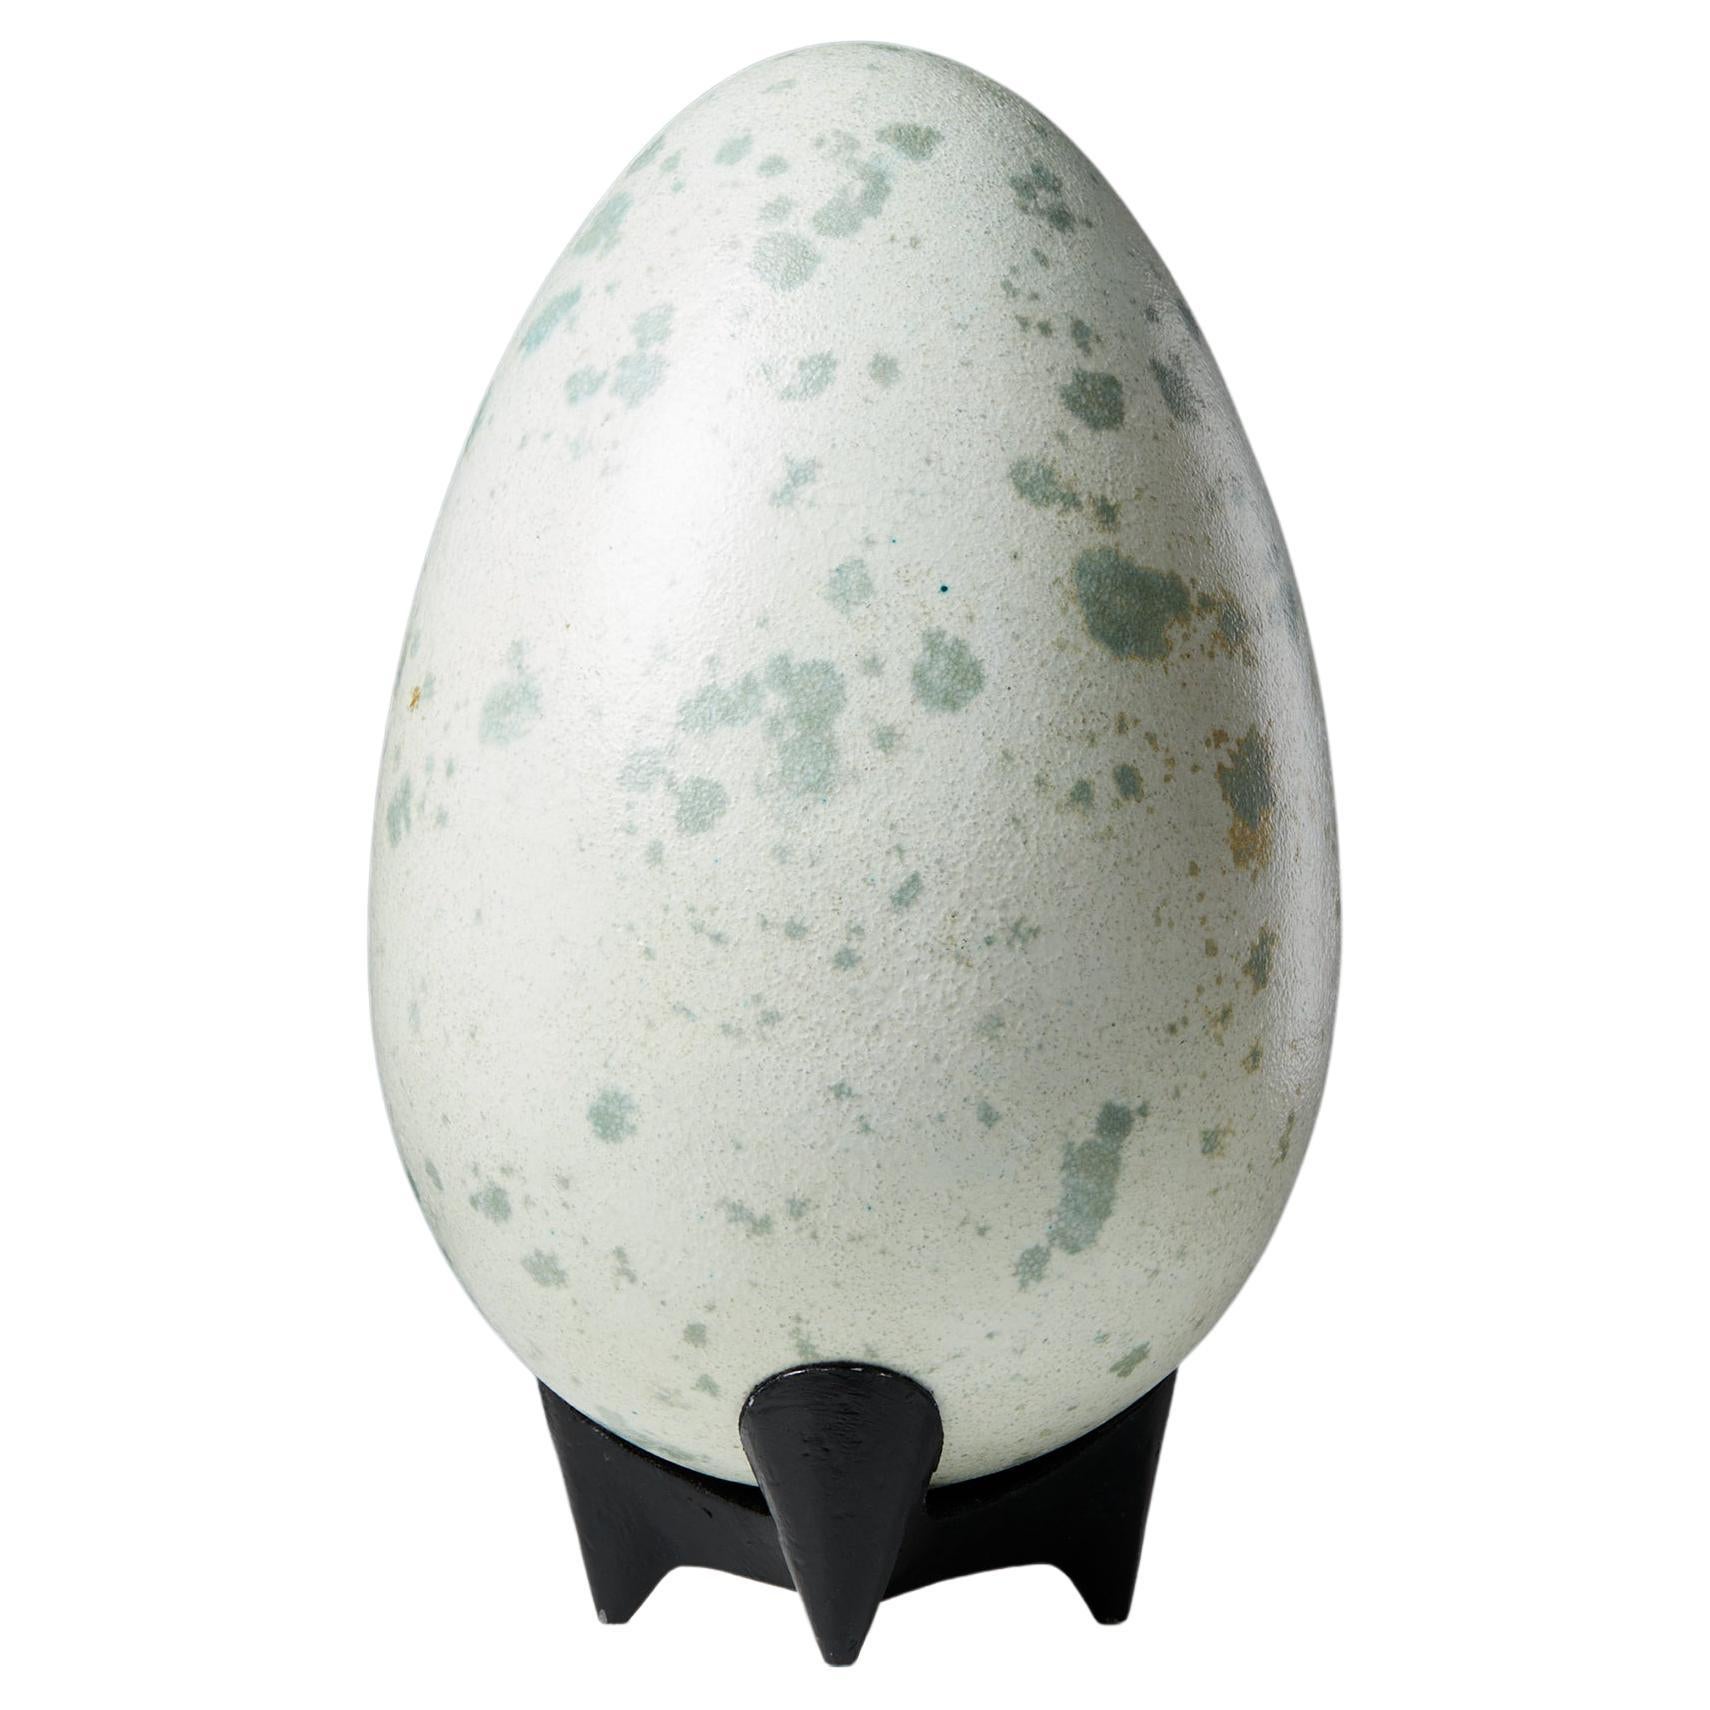 Egg Sculpture Designed by Hans Hedberg made in Sweden during the 1980s / 1990s